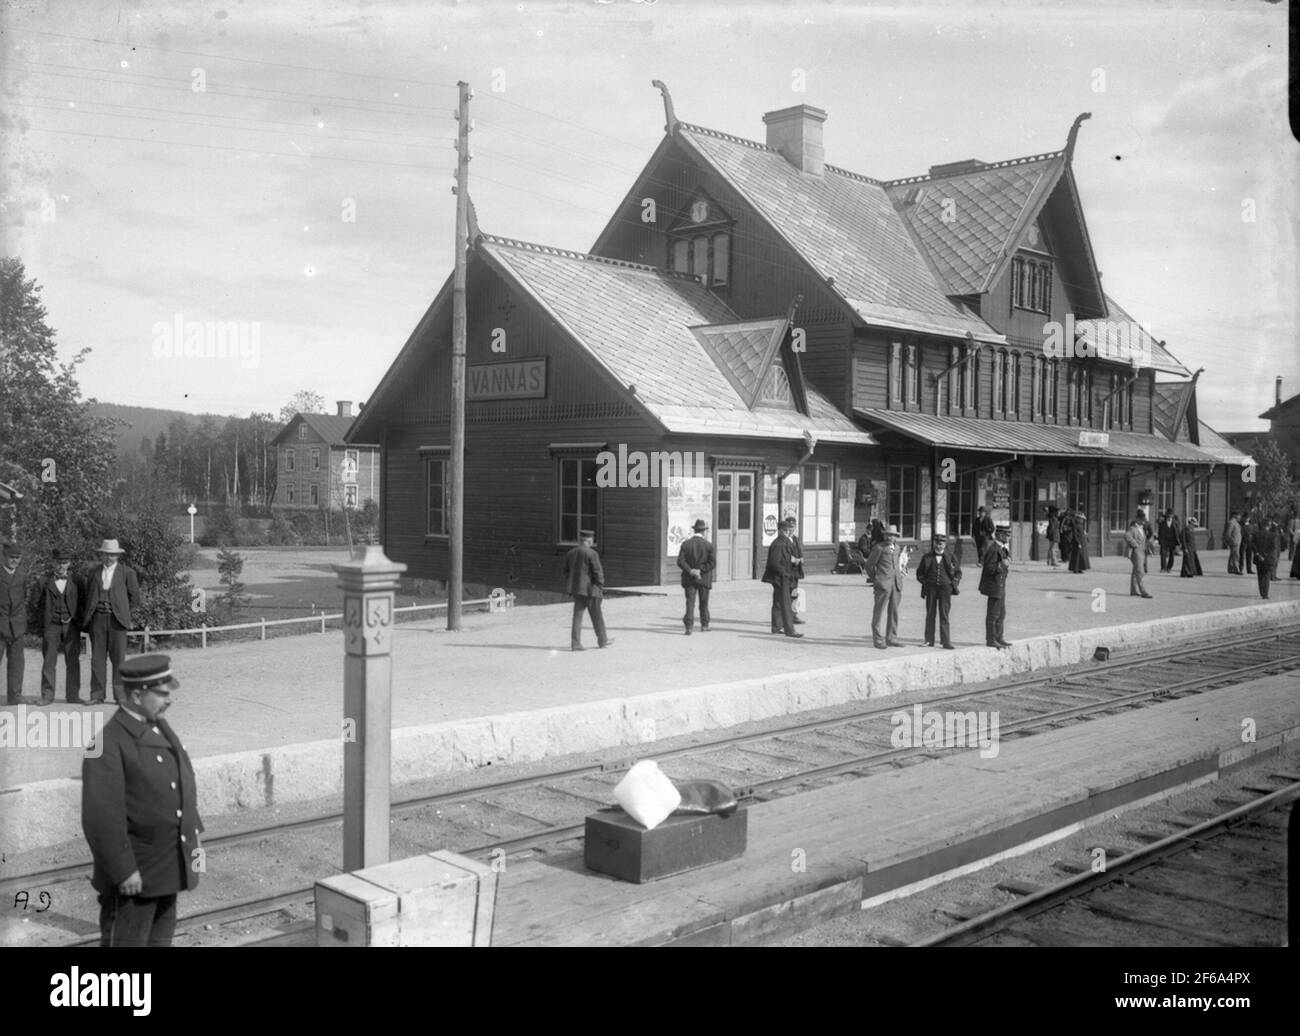 Photo of the first Lapland Expressions 19 June 1903 departed the Lapland Express, the first fast and luxury train to Lapland from Stockholm Central. The train consisted of two beds in the first class, a salon wagon, a restaurant car and a third-country car for the service. The Lapland Express departed at four o'clock in the afternoon from the center. 48 hours later, the train was in Narvik.Tvåvånpån Stationhouse in wood. Architect: gelly. The station OMB. 1927, K-marked in 1986. The station was built in 1889. Stock Photo